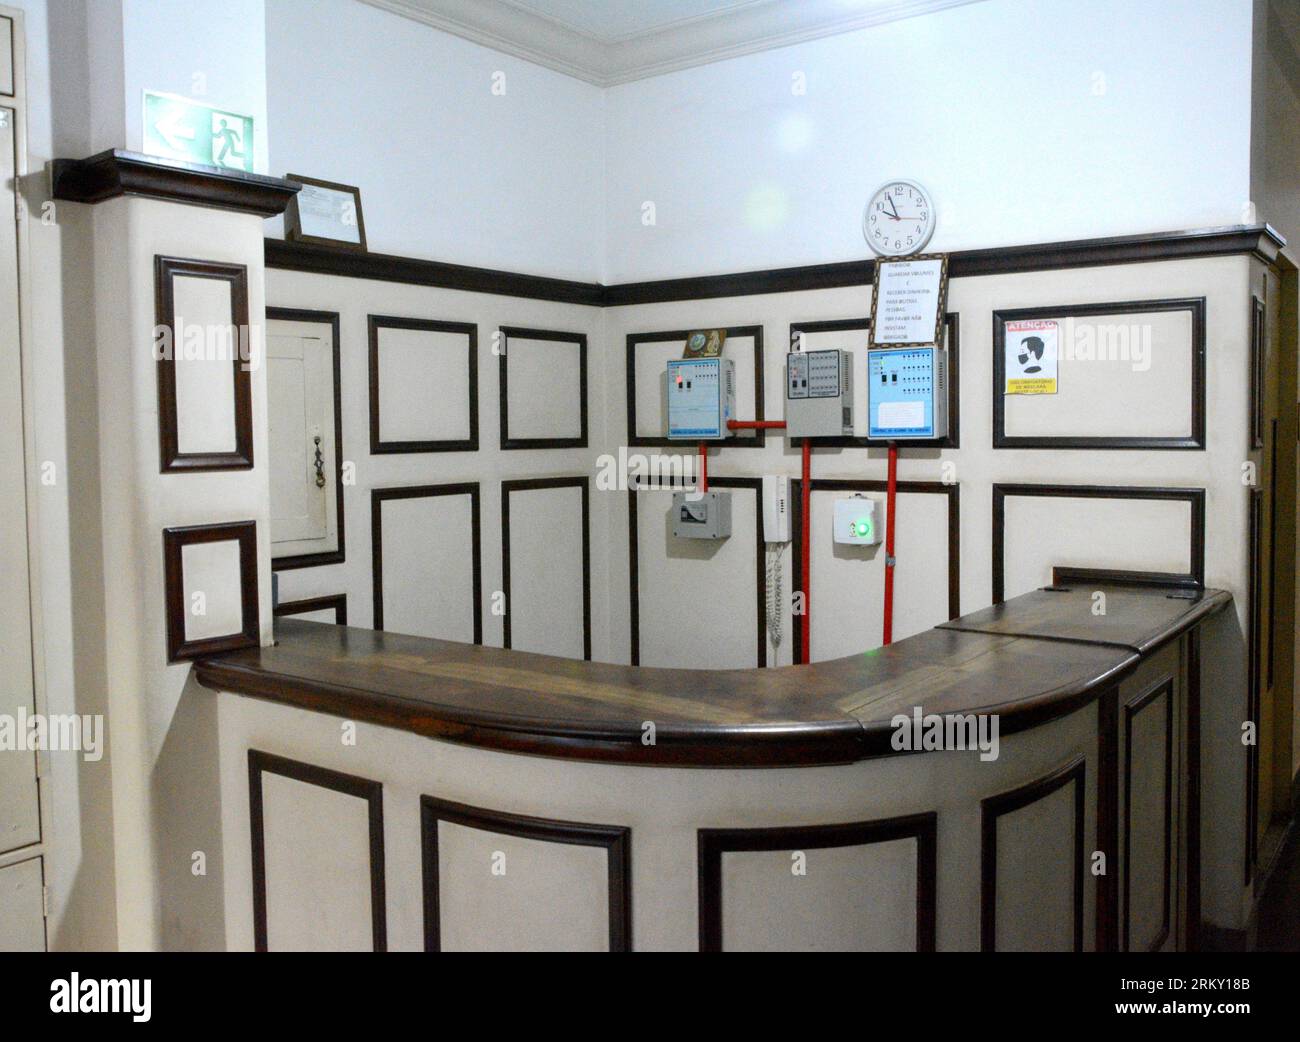 Old building entrance hall with counter, clock and equipment. Brazil Stock Photo